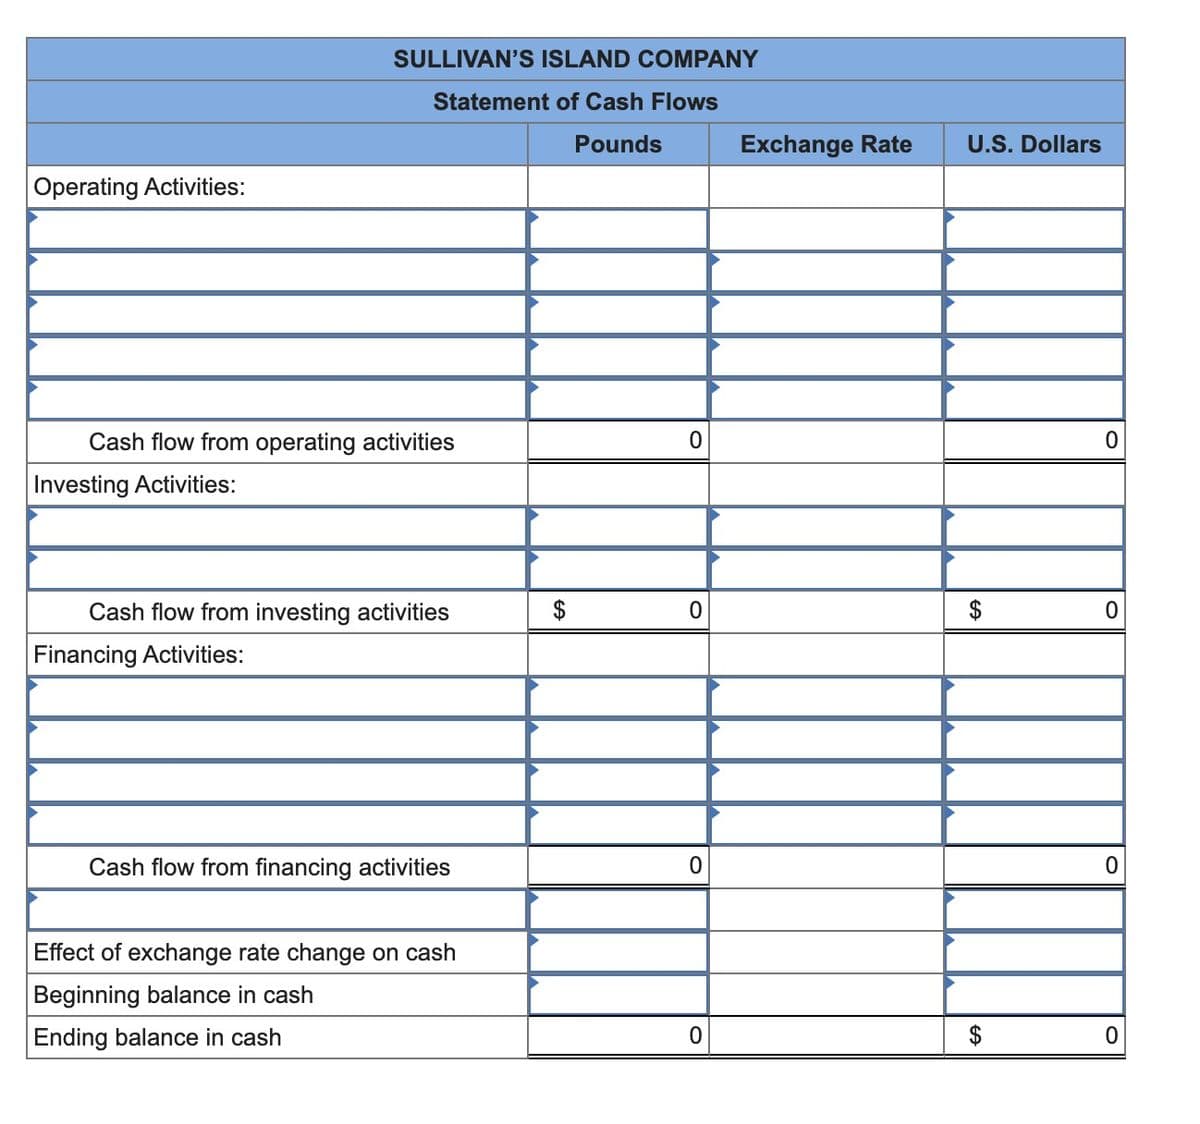 Operating Activities:
SULLIVAN'S ISLAND COMPANY
Statement of Cash Flows
Pounds
Cash flow from operating activities
Investing Activities:
Cash flow from investing activities
Financing Activities:
Cash flow from financing activities
Effect of exchange rate change on cash
Beginning balance in cash
Ending balance in cash
$
0
0
0
0
Exchange Rate
U.S. Dollars
0
0
0
0